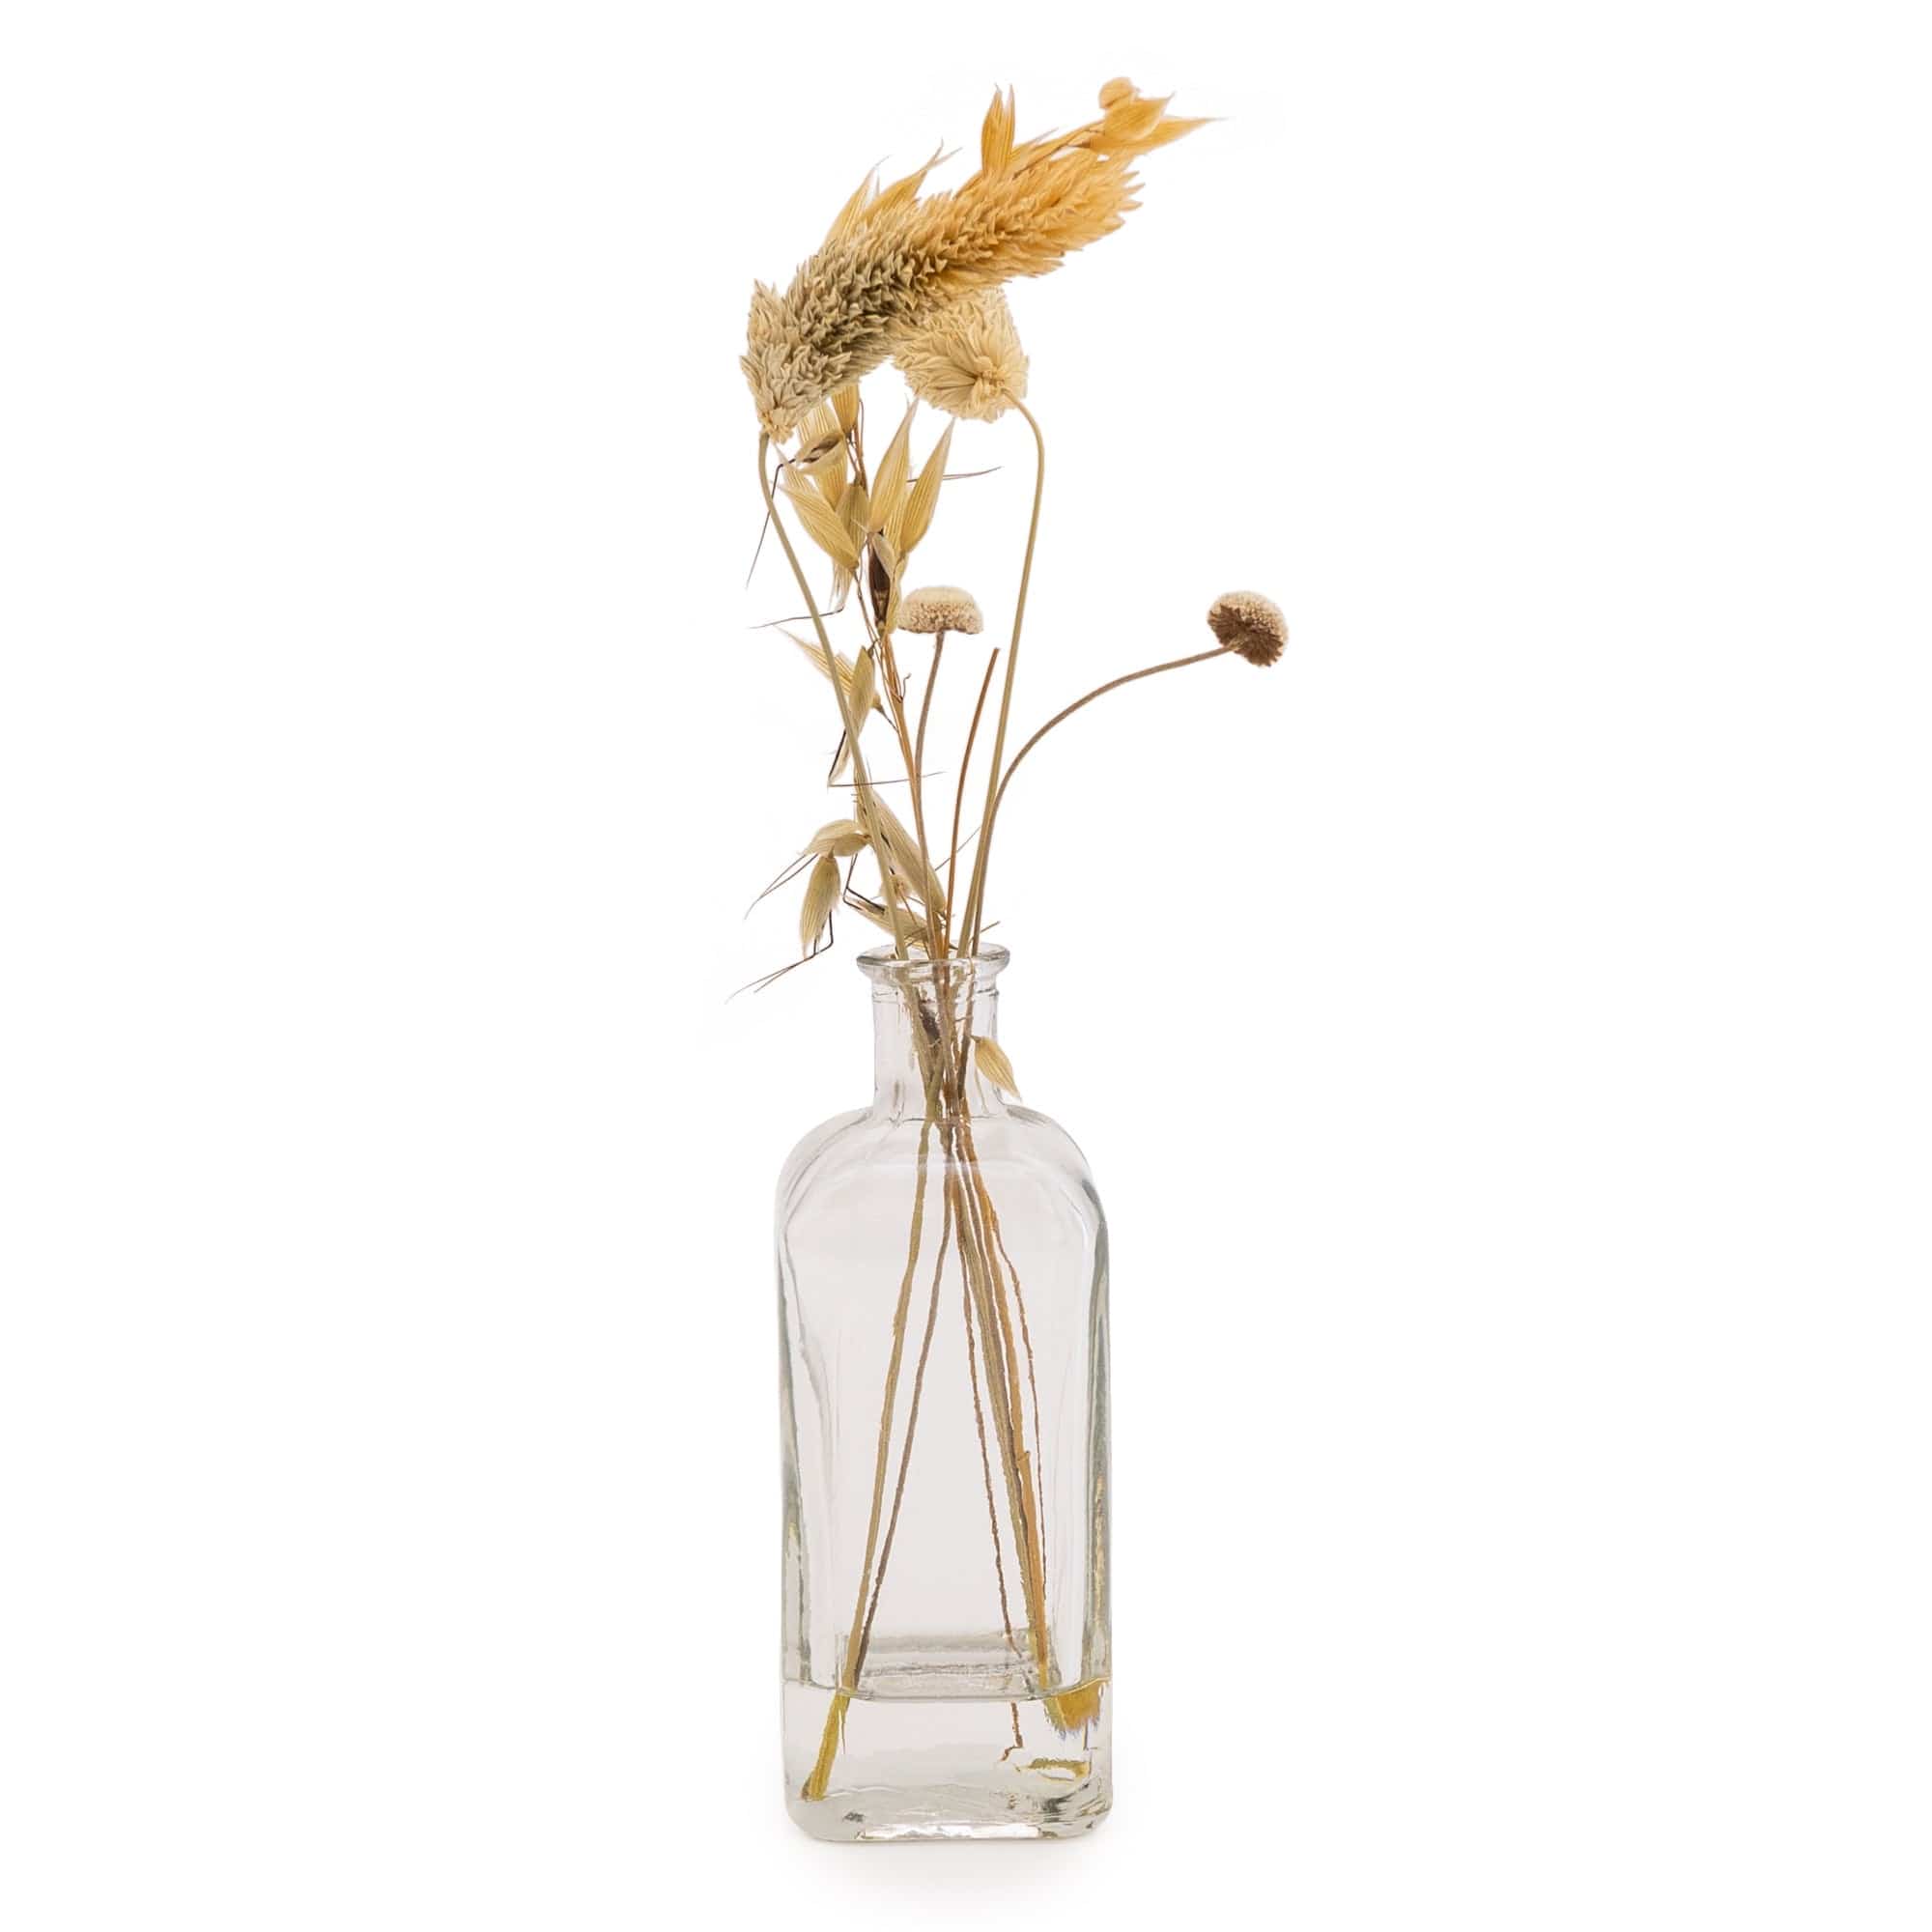 Small Dried Grasses & Flowers Arrangement in Square Glass Vase - Kate's Cupboard